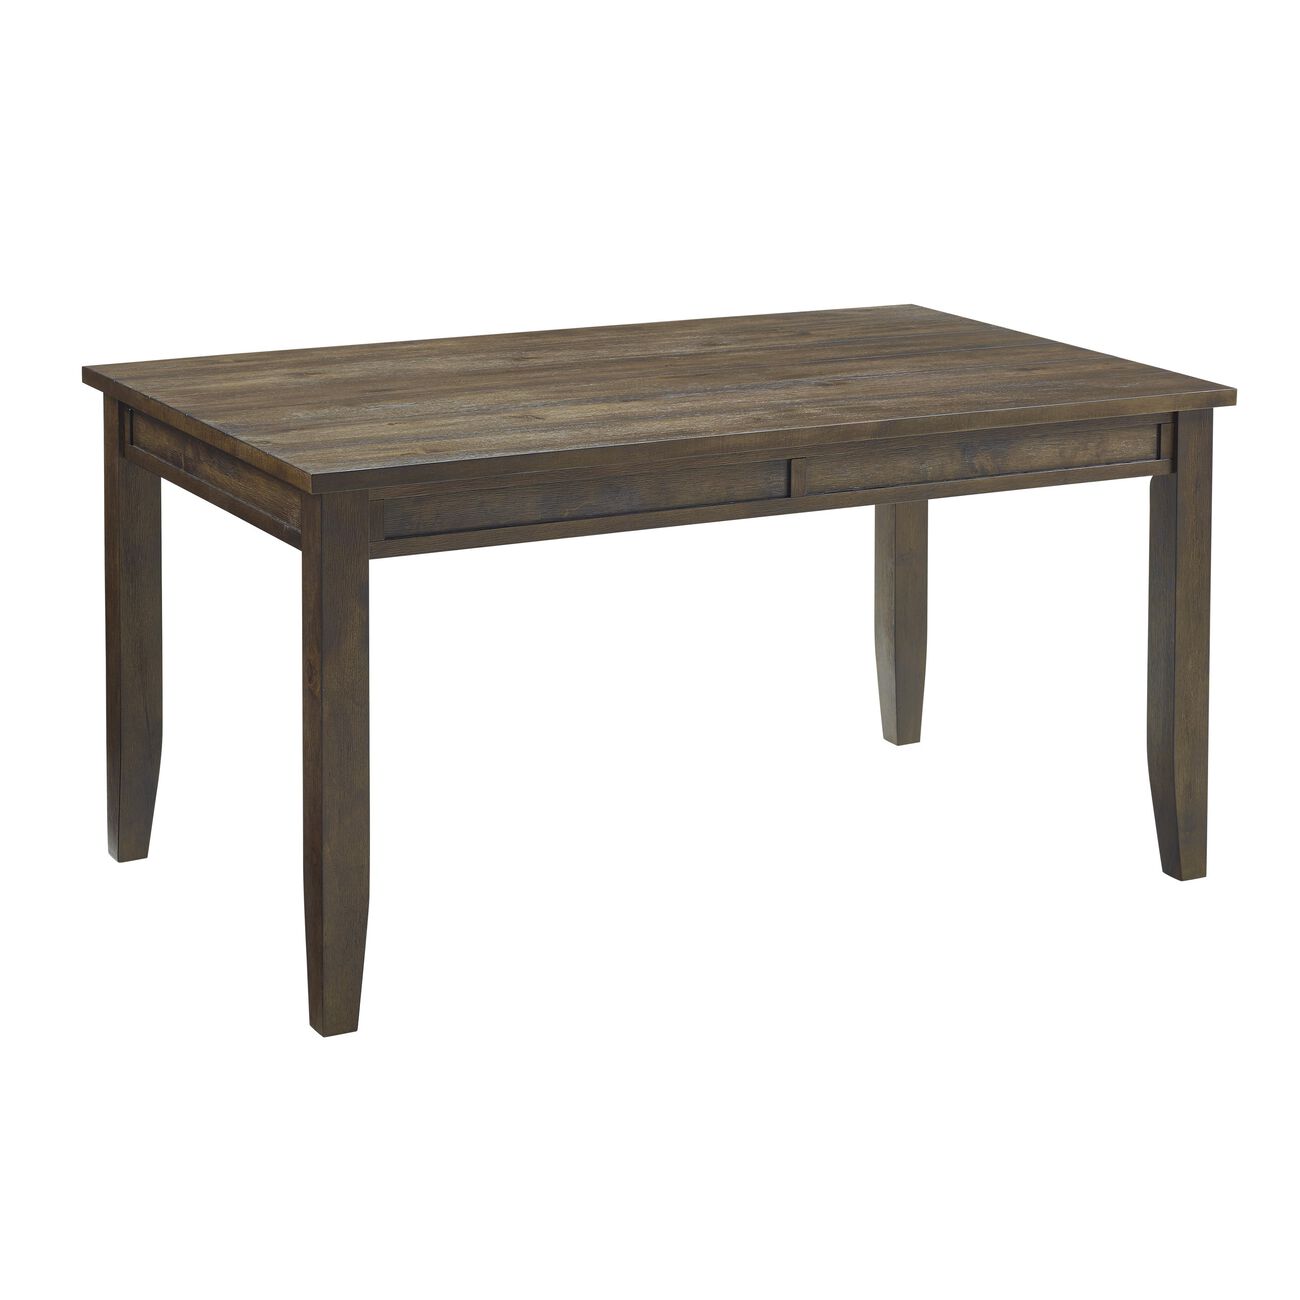 Plank Design Wooden Rustic Dining Table with Chamfered Legs, Brown